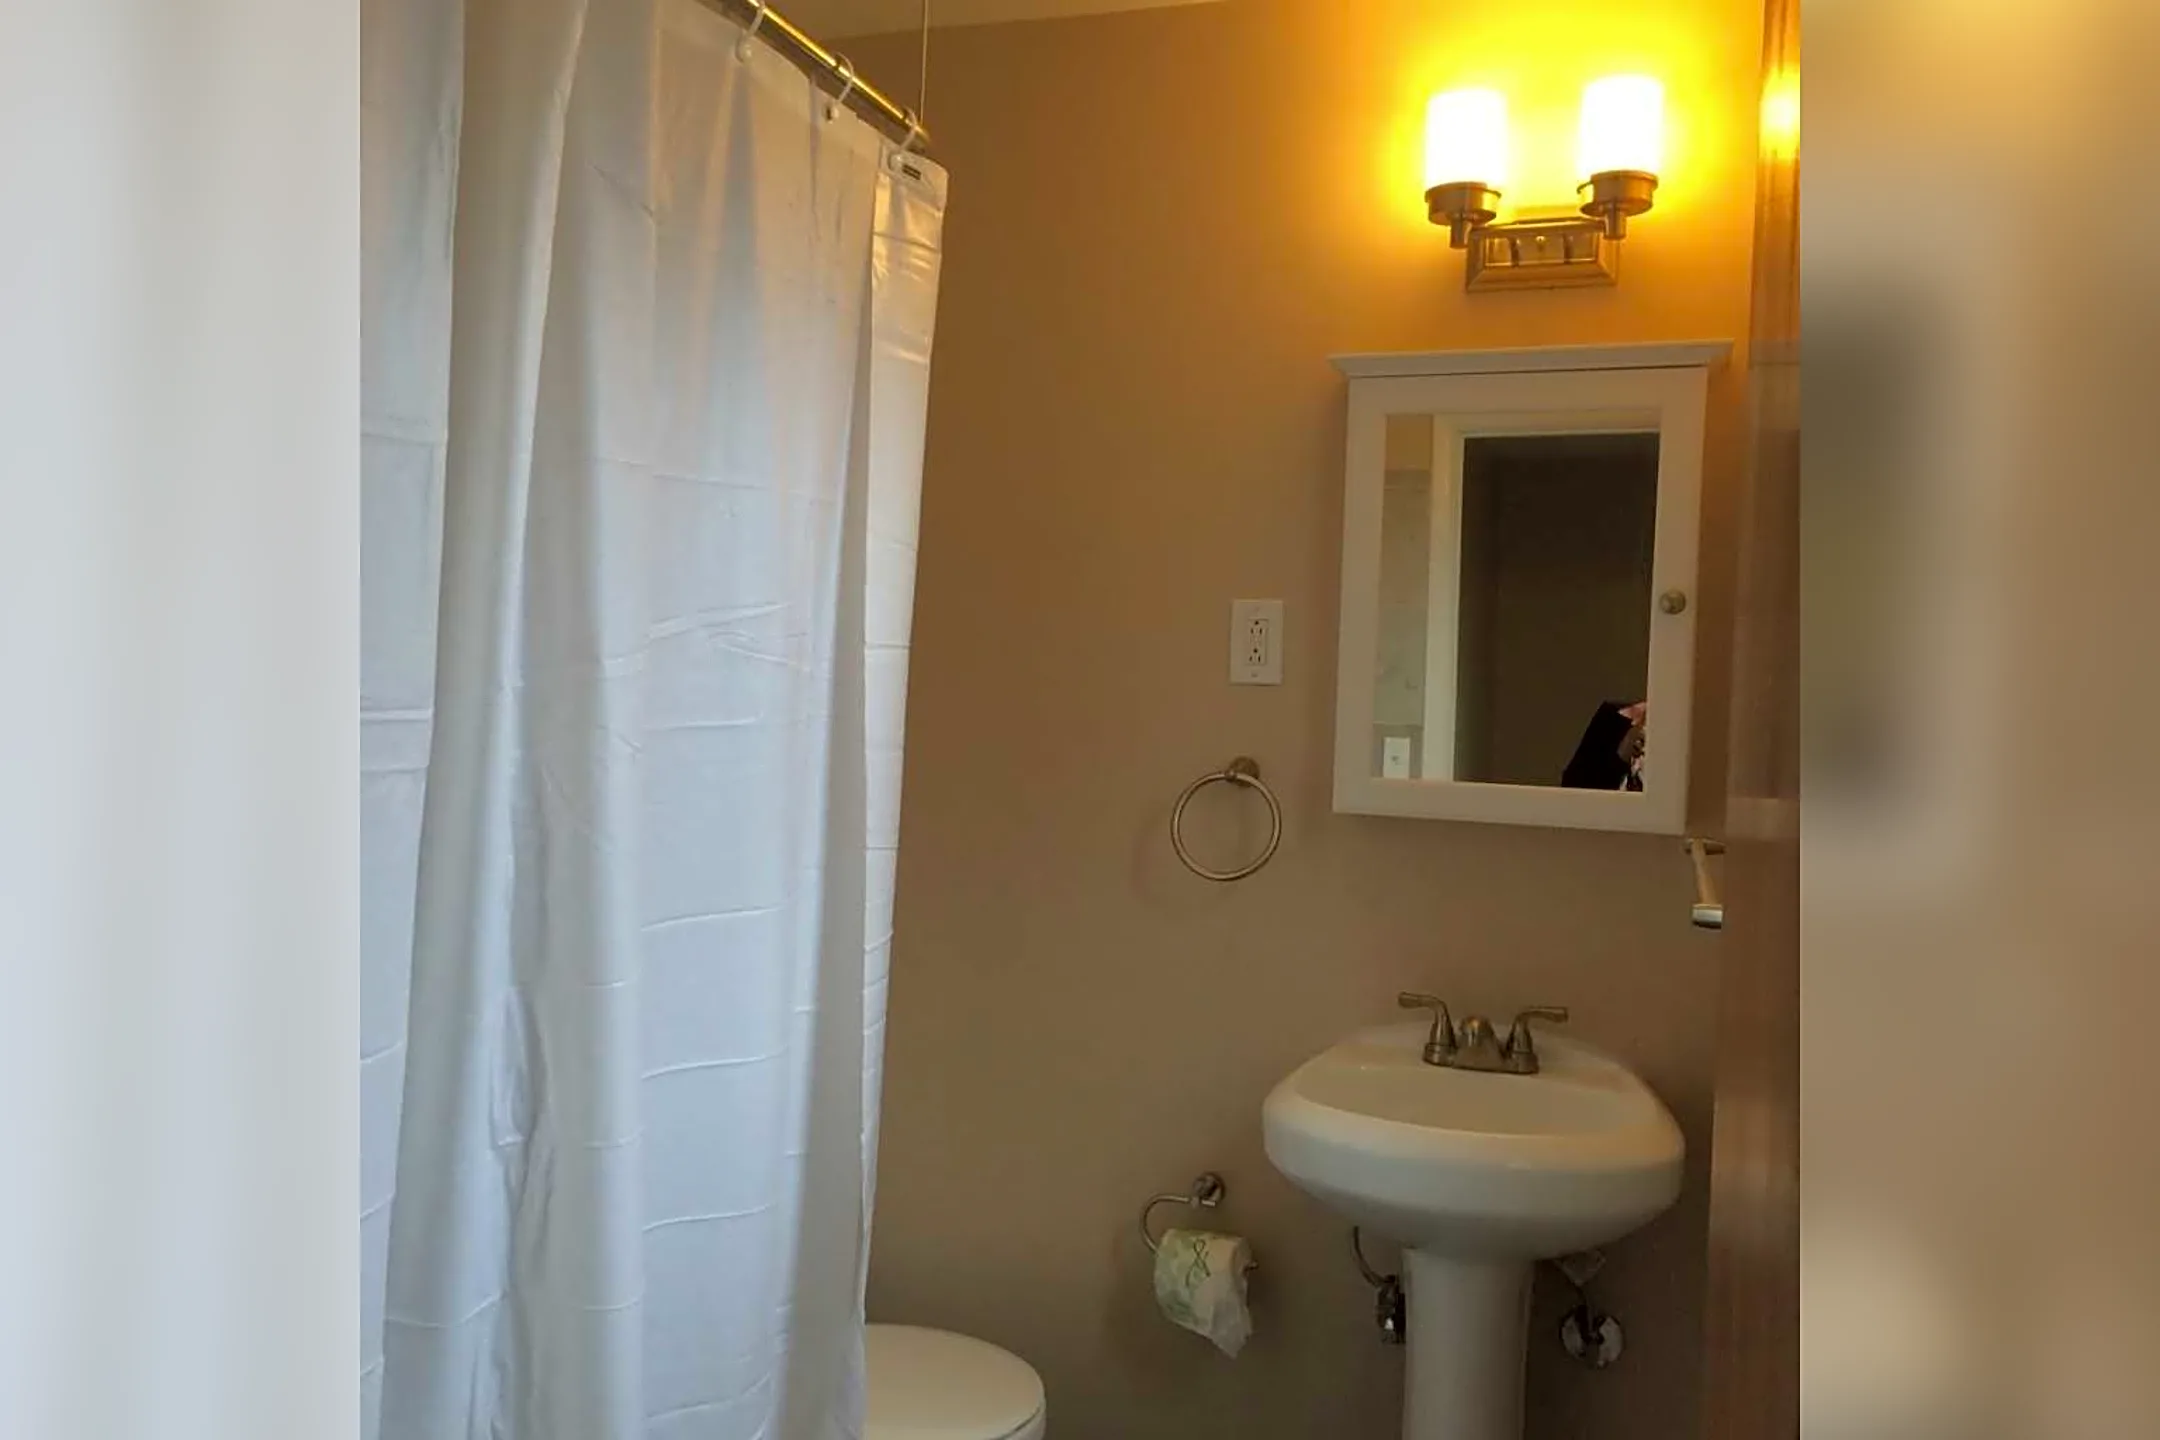 Bathroom - Lawn Village Apartments and Townhomes - Fairview Park, OH